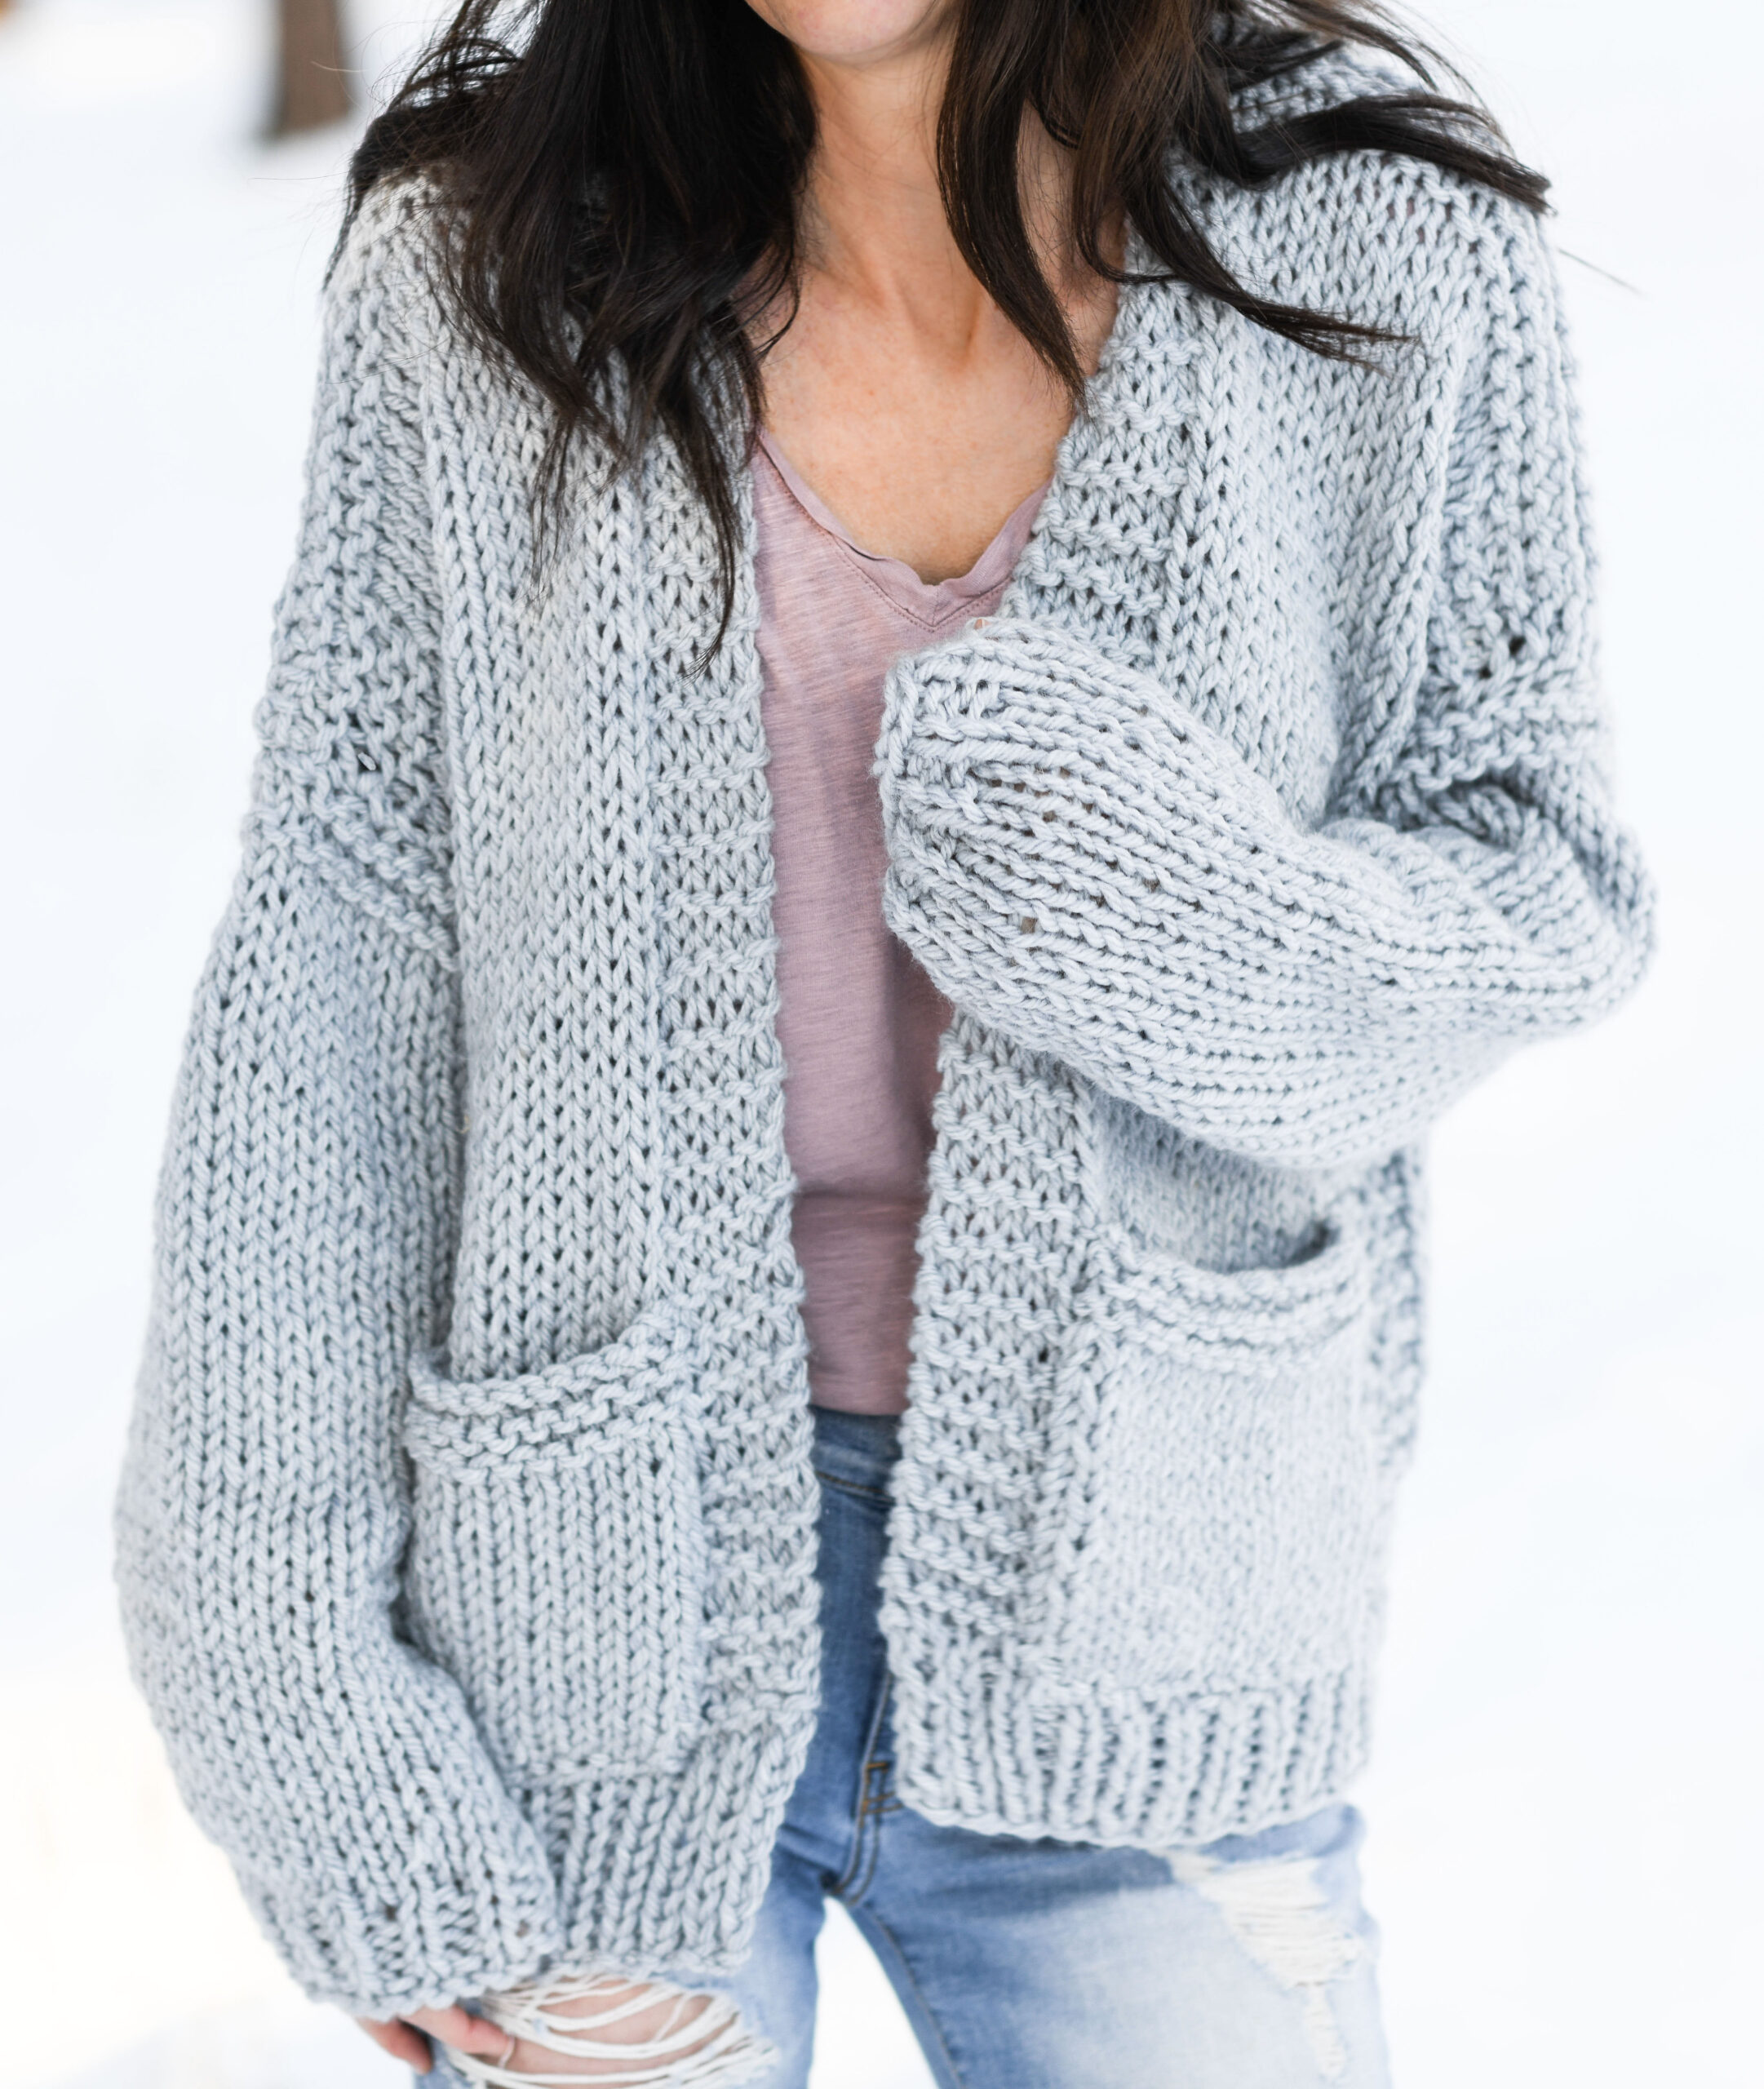 Super Slouchy Crochet Sweater Pattern, Cozy Comfy Crocheted Sweater Pattern  With Instructions for Sizes Small, Medium, Large, XL, 2X and 3X 